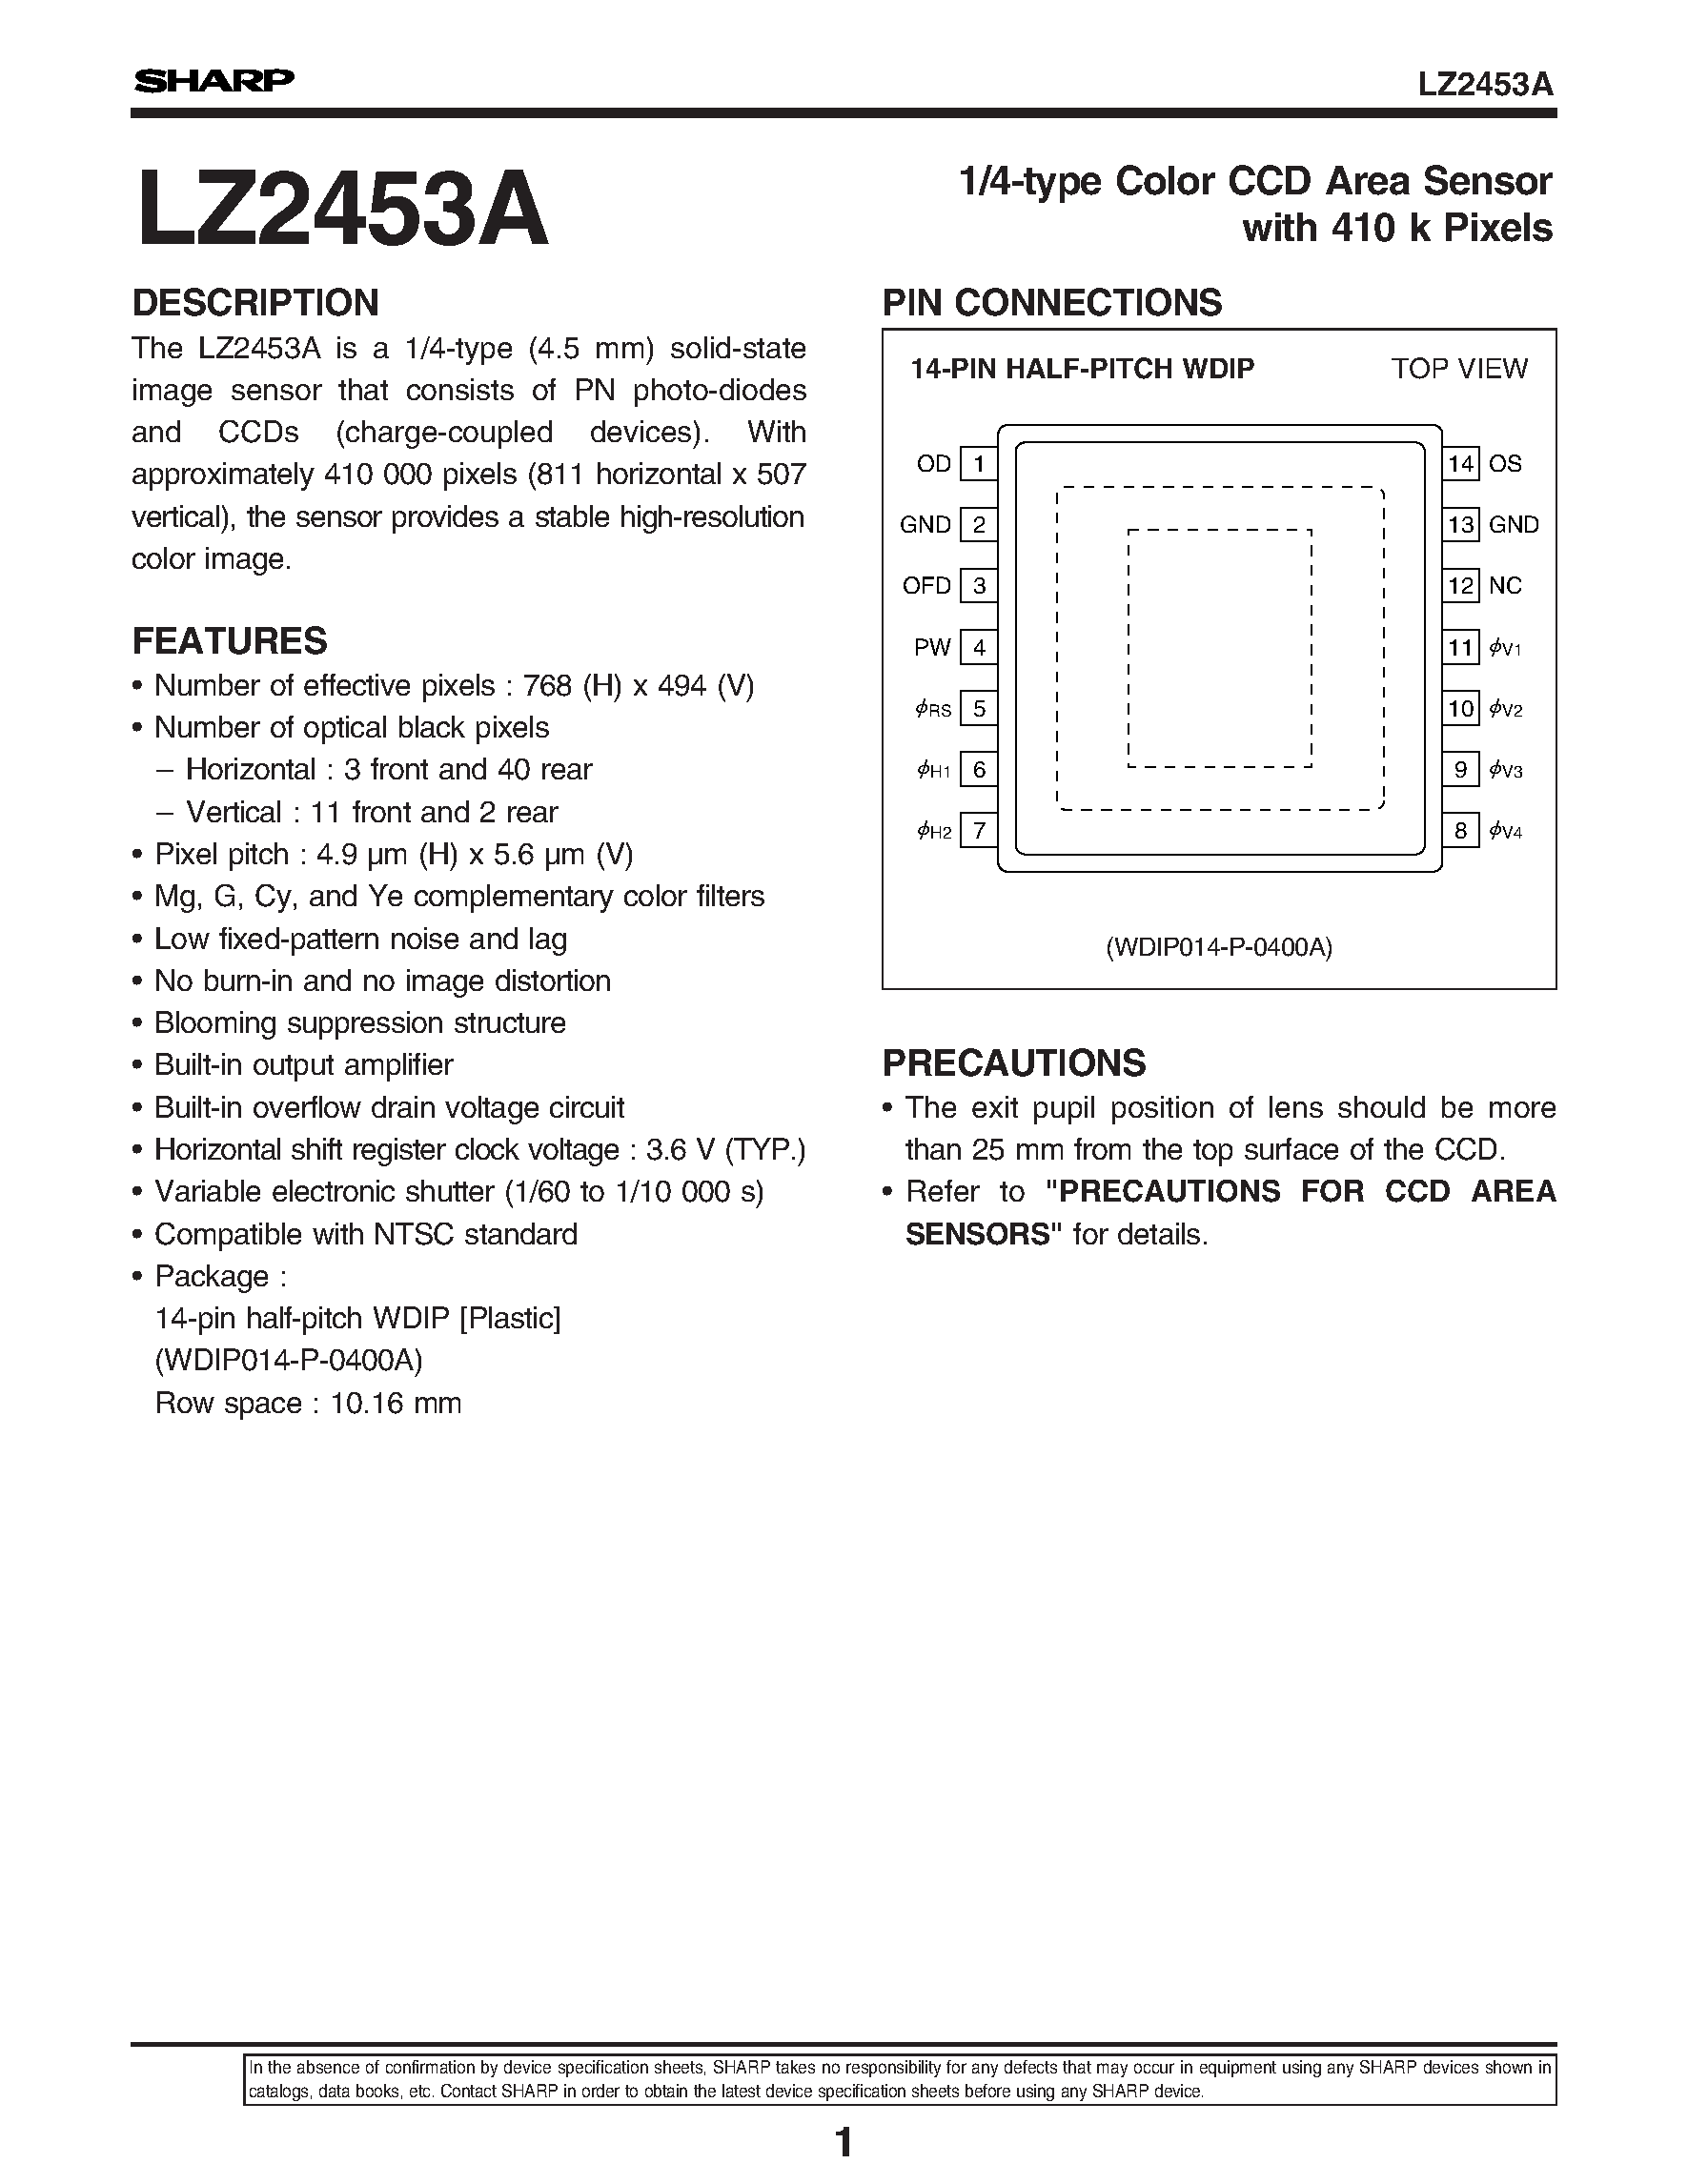 Datasheet LZ2453 - 1/4-type Color CCD Area Sensor with 410 k Pixels page 1